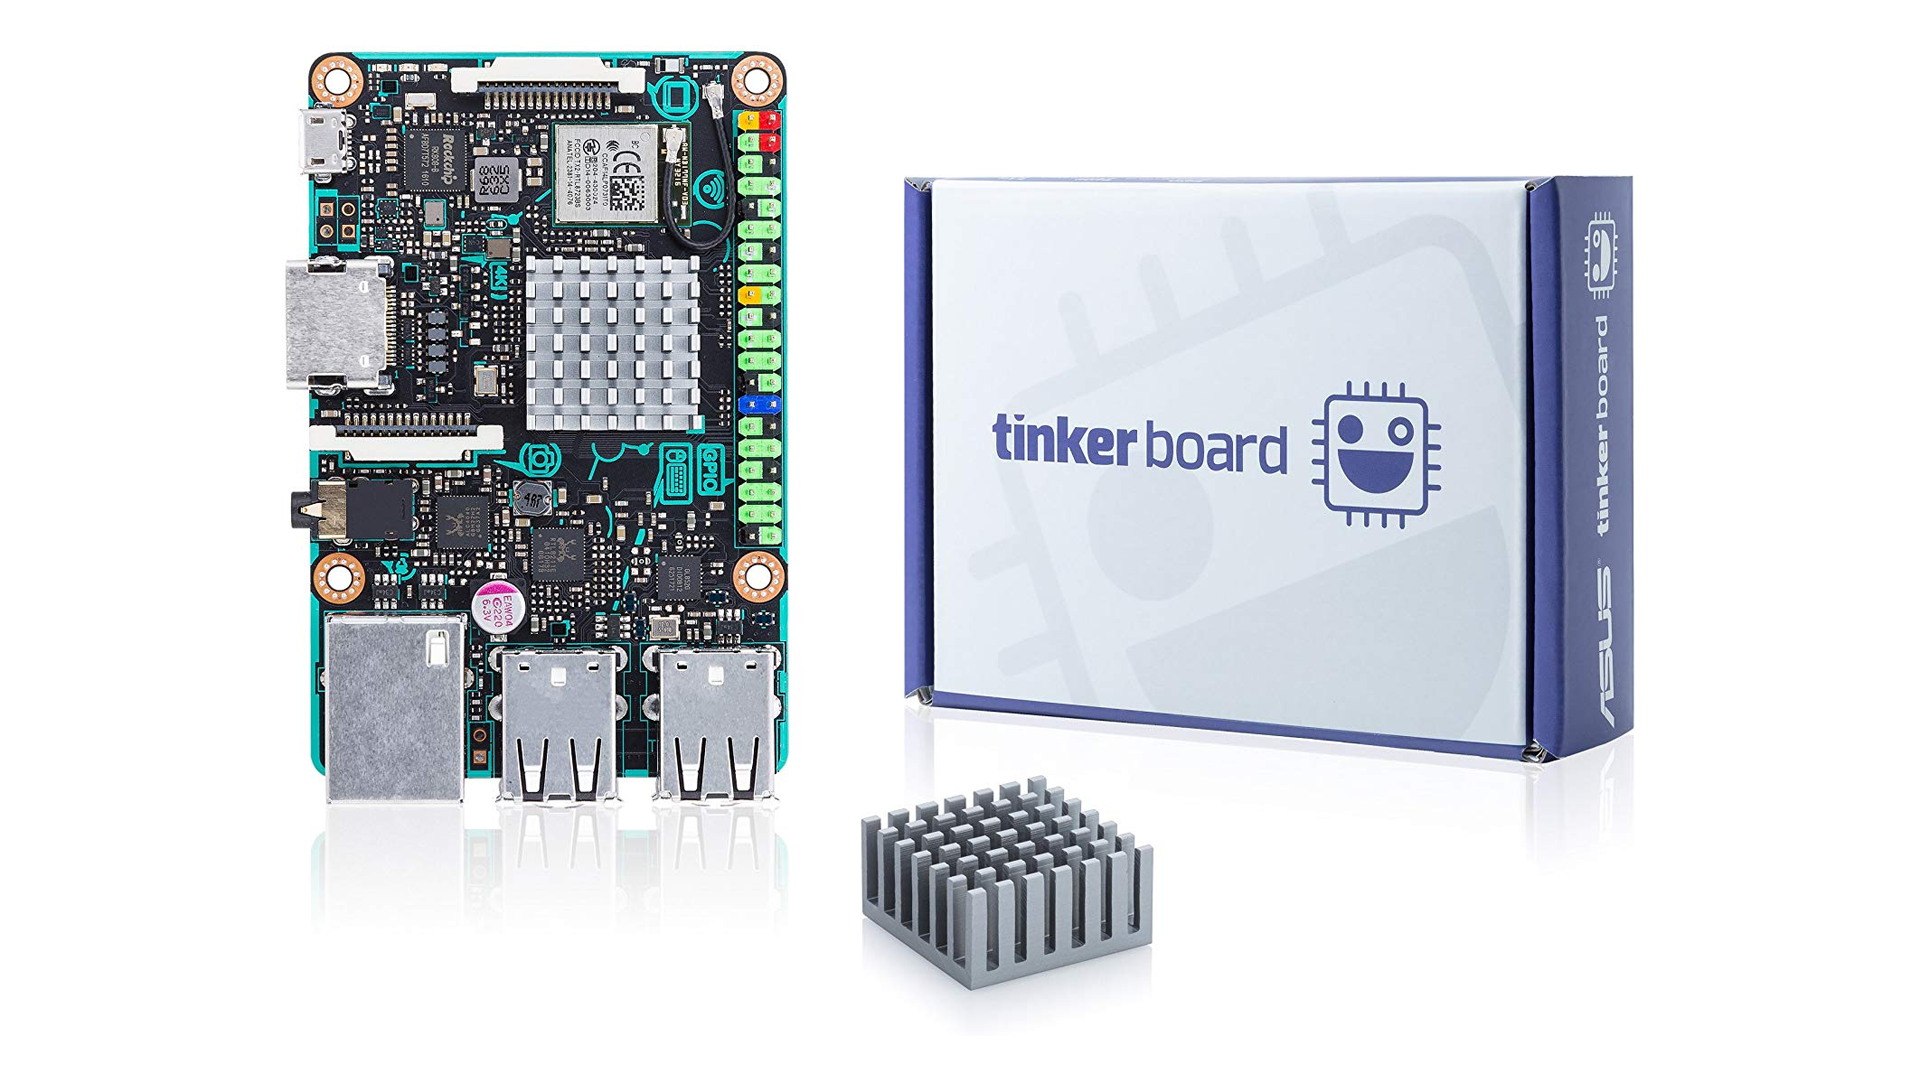 The ASUS Tinker Board.